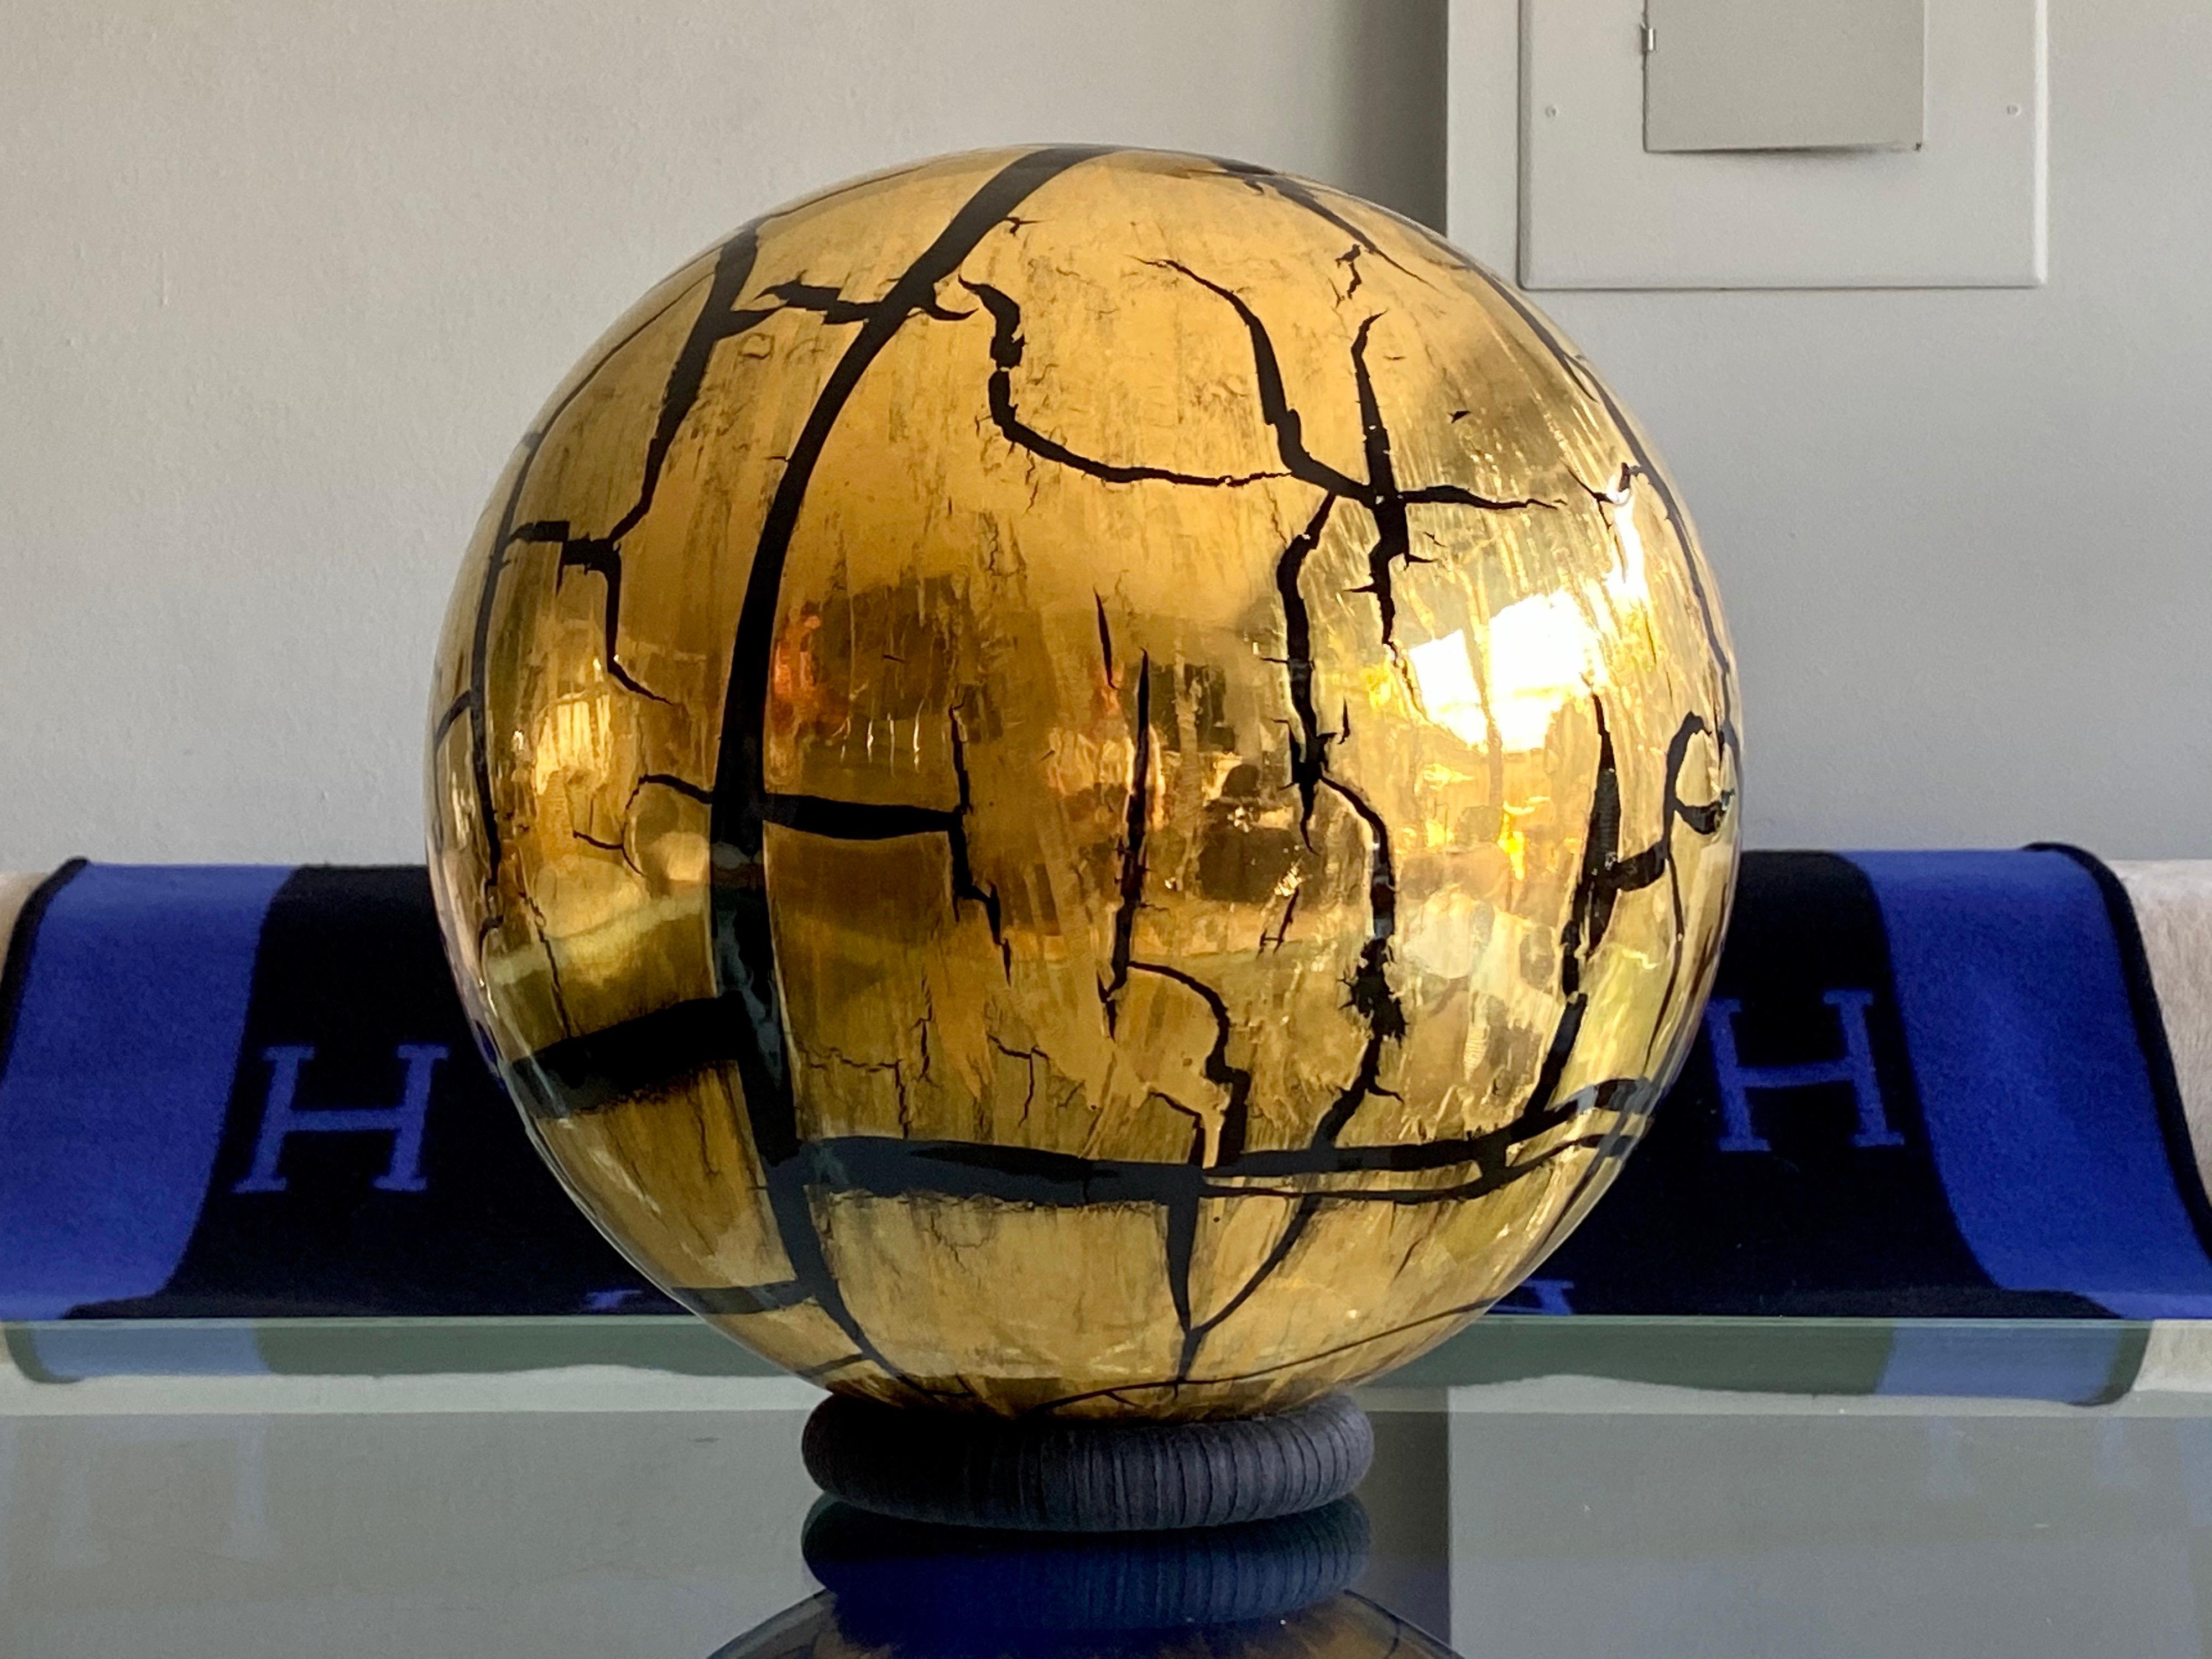 Larry Lubow Sphere sculpture with circle shaped pedestal.
The fractures, the random abstractions of lines in crackle type finish over the gold-plated ceramic sphere sculpture is by the artist Larry Lubow and signed. Dated 96.